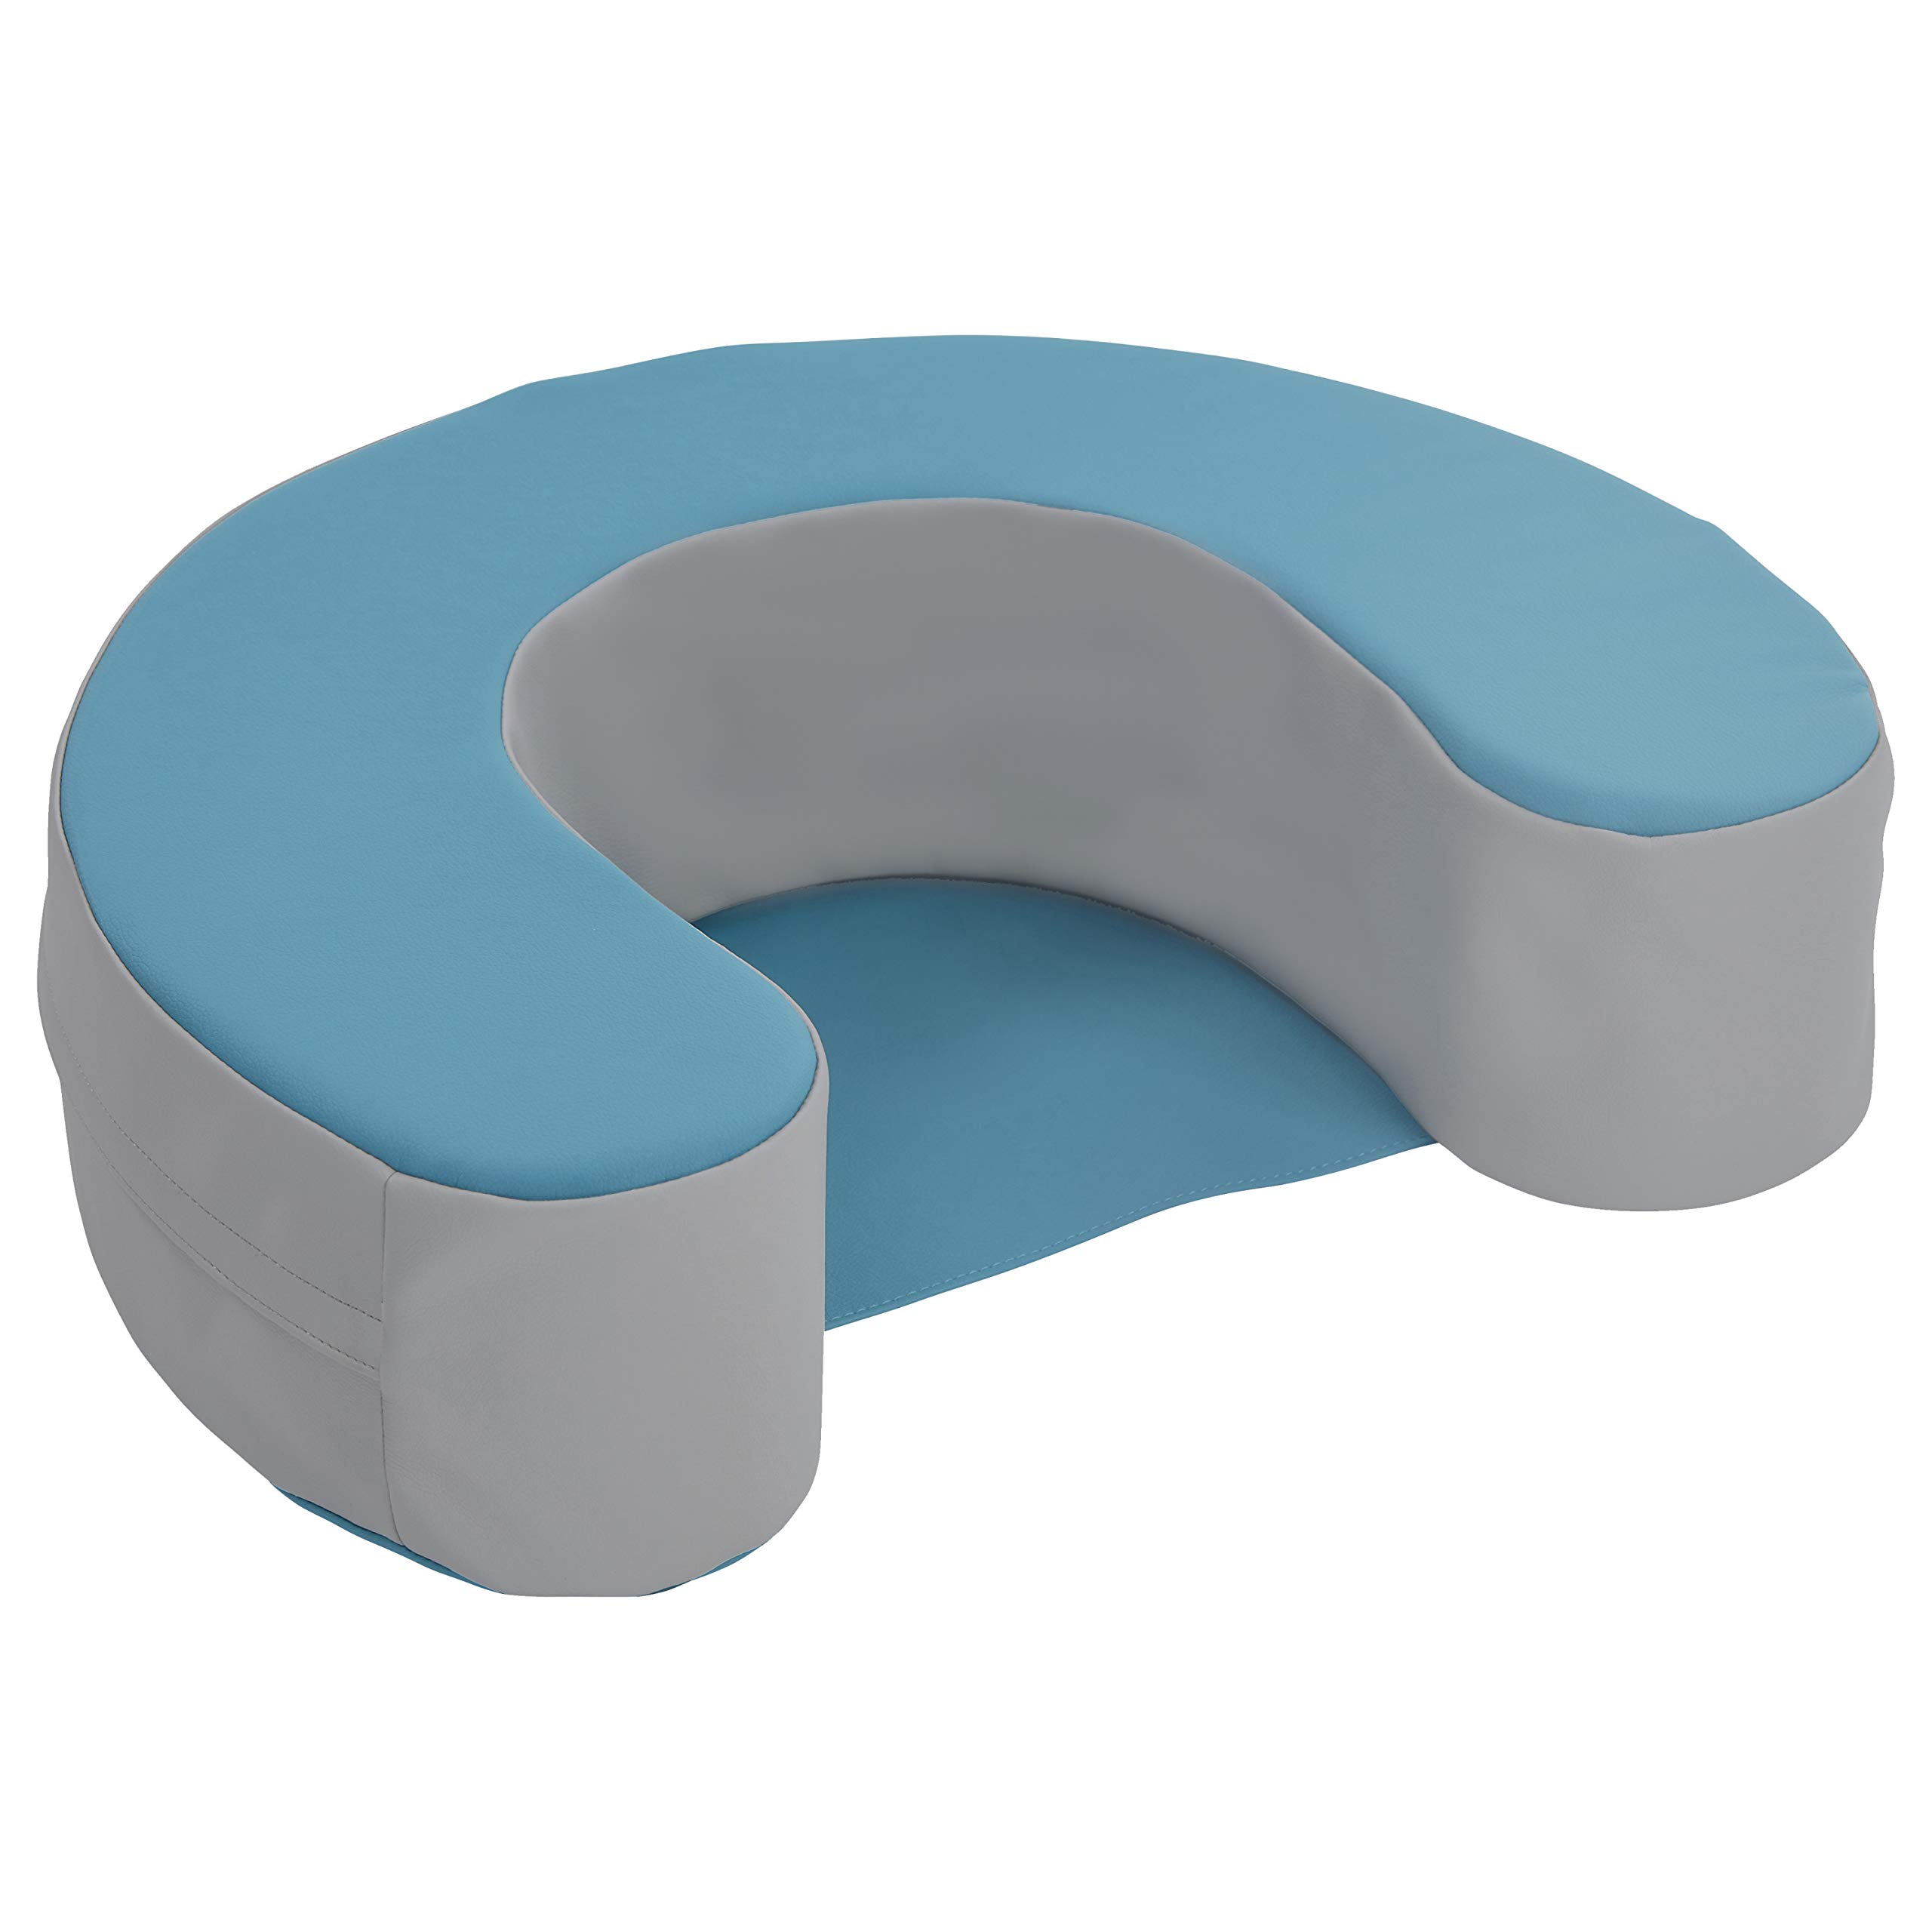 Factory Direct Partners 10423-TLGY SoftScape Sit and Support Ring for Babies and Infants, Soft Cushioned Foam Floor Seat with Non-Slip Bottom for Nursey, Playroom, Daycare - Teal/Gray